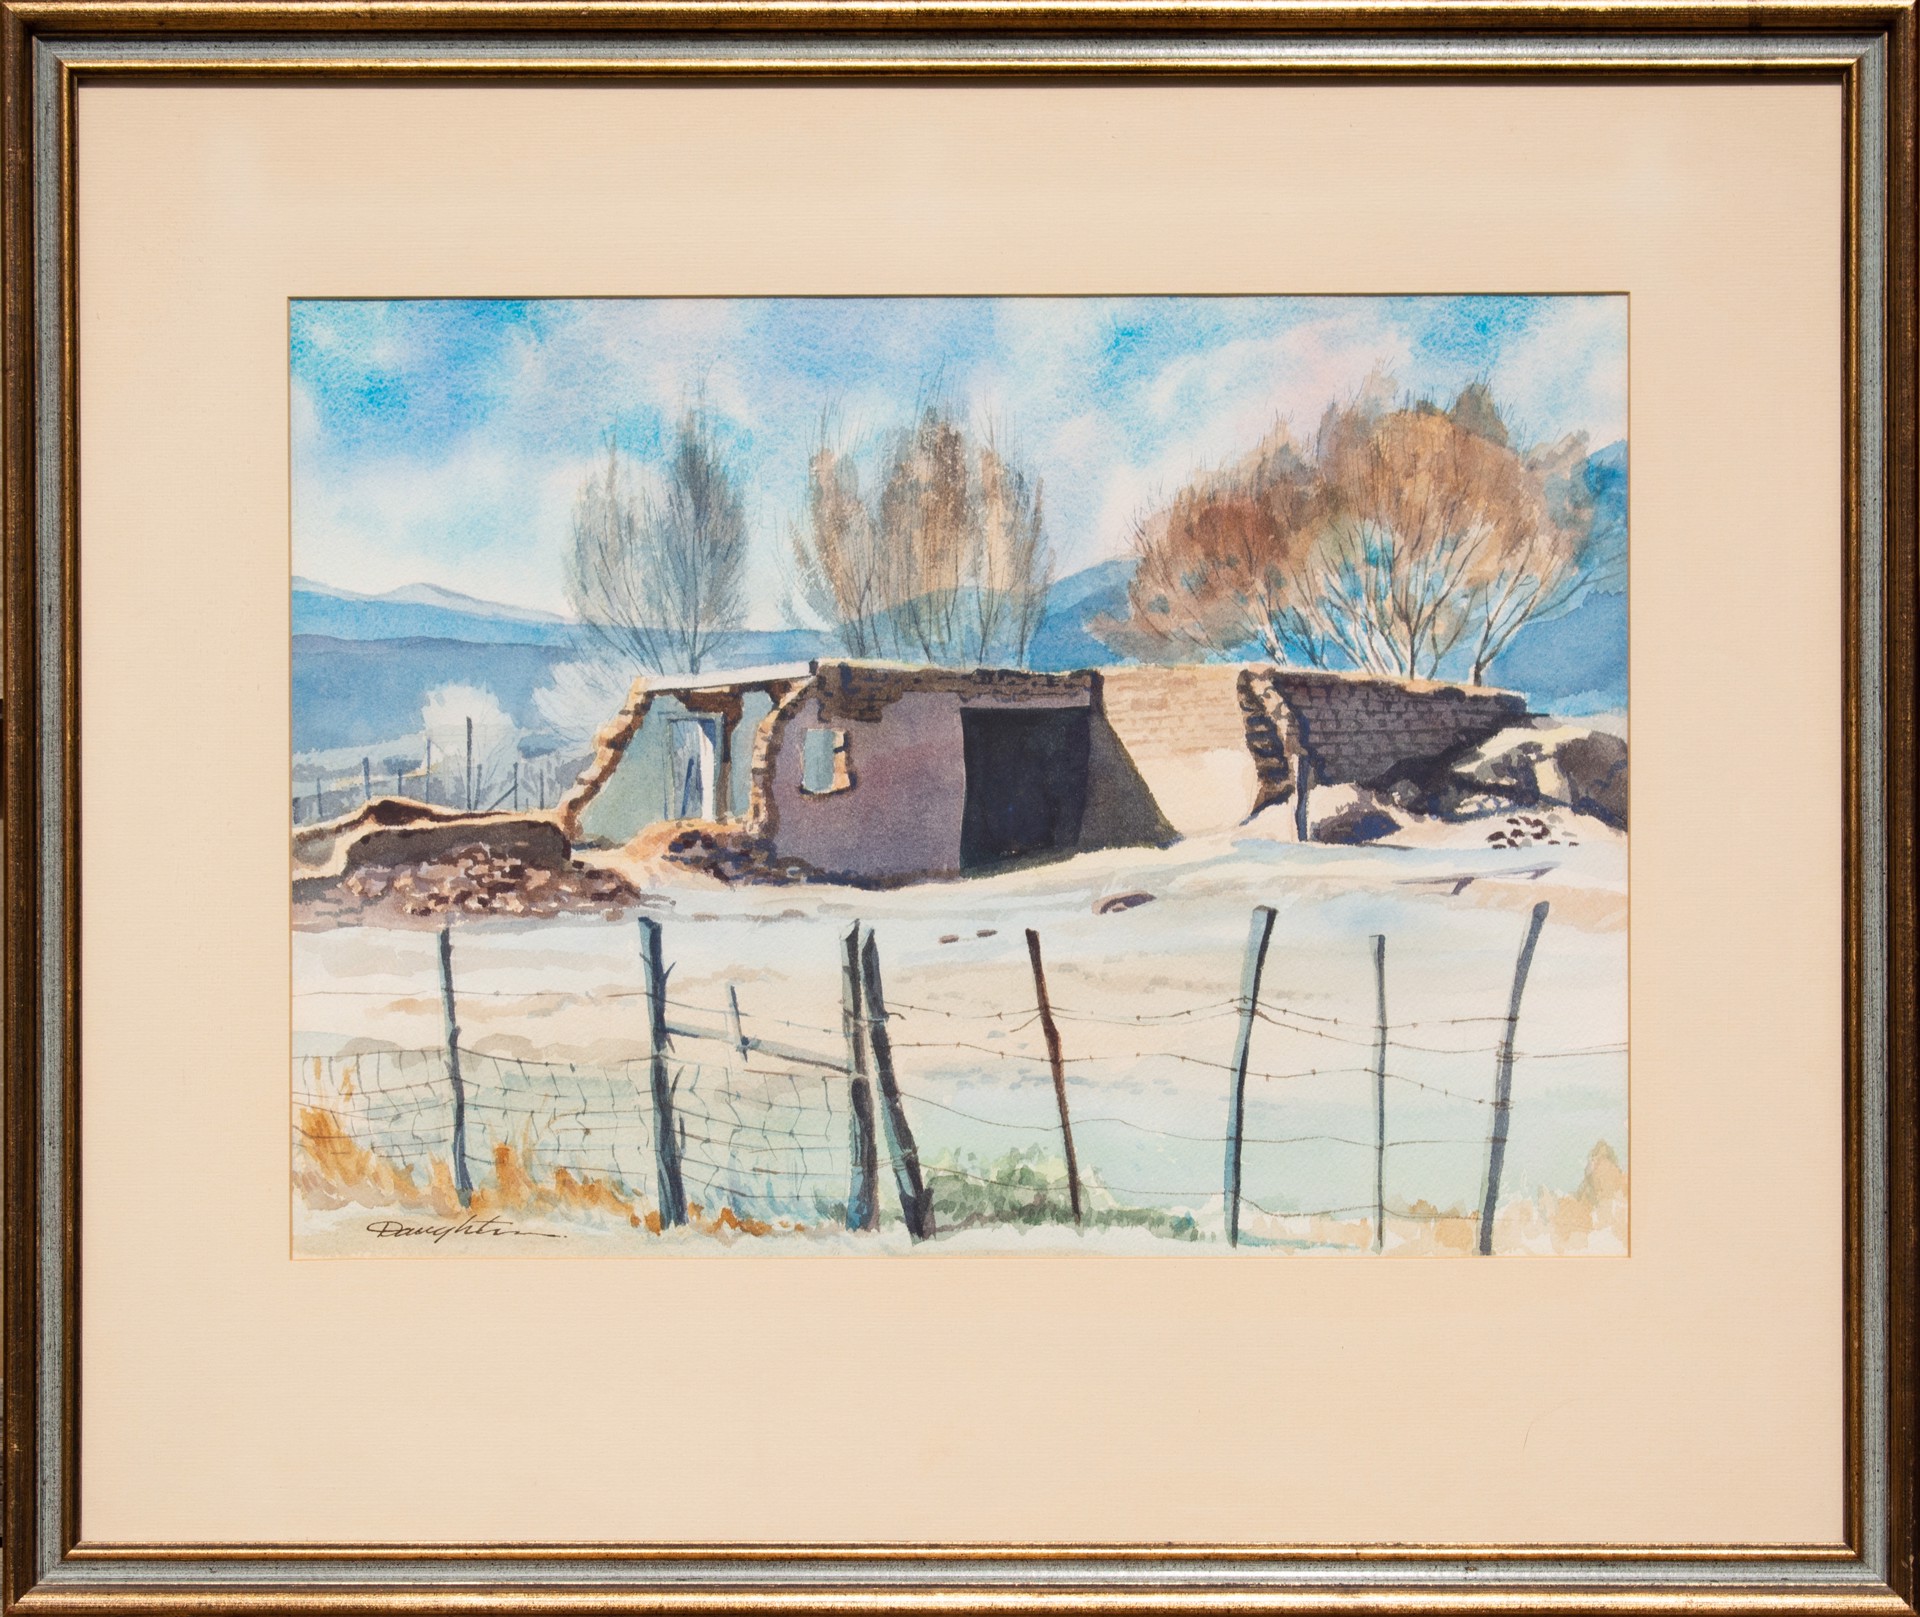 Lower Ranchitos by Robert Daughters (1929-2013)